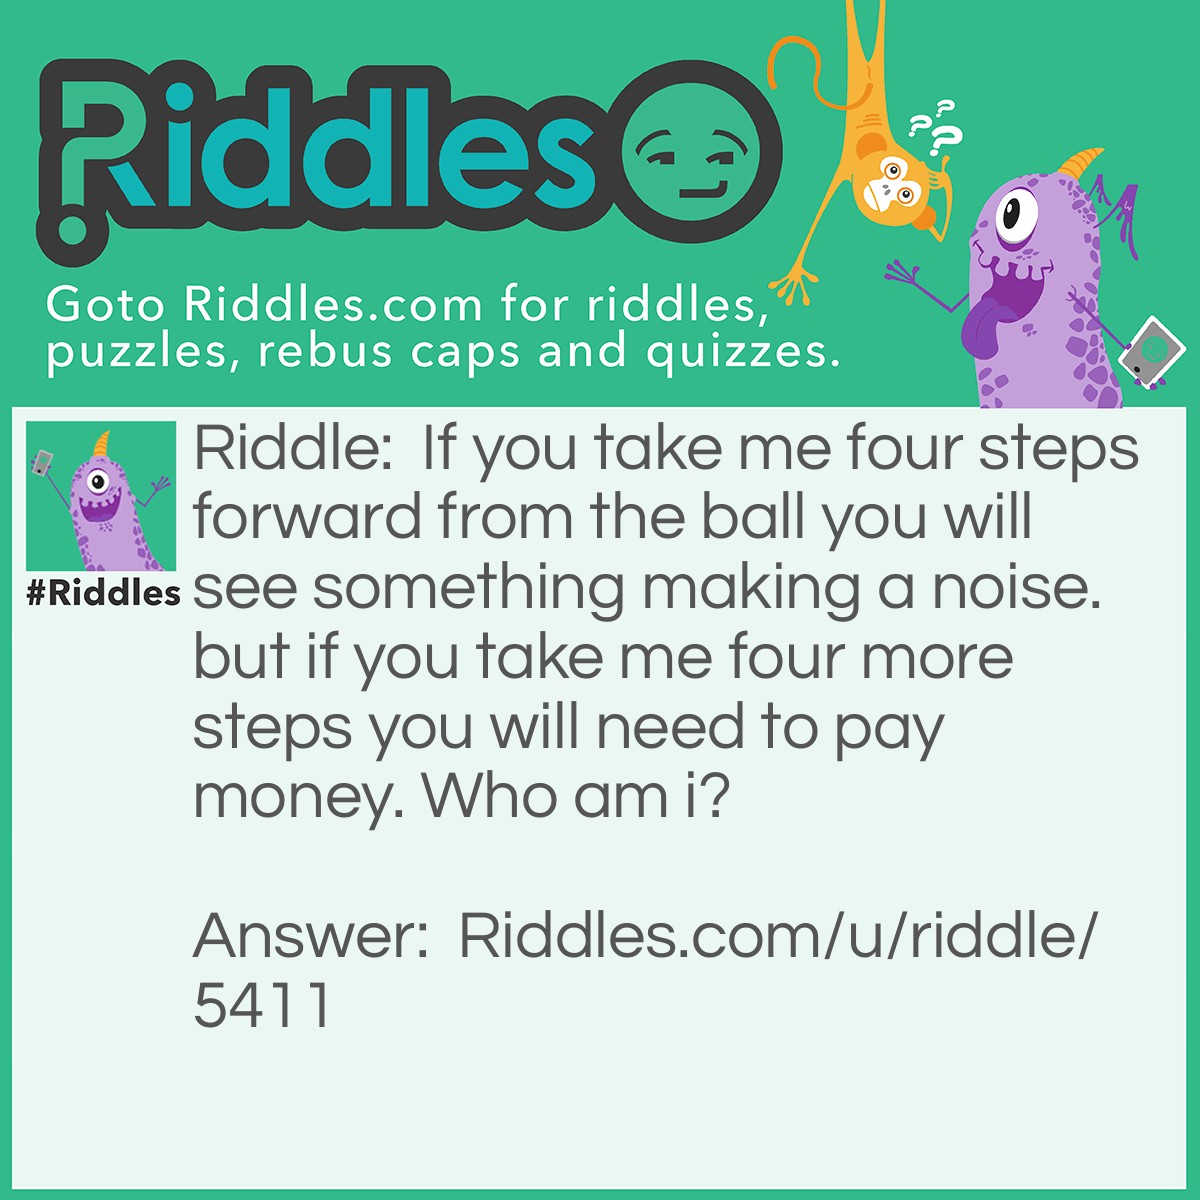 Riddle: If you take me four steps forward from the ball you will see something making a noise. but if you take me four more steps you will need to pay money. Who am i? Answer: The letter 'a' If you take the letter 'a' from the word 'ball' and you move it four steps it becomes 'e' and the word is 'bell' and it makes noise and then you move it four more it becomes 'i' and then the word is 'bill' and you need to pay money.